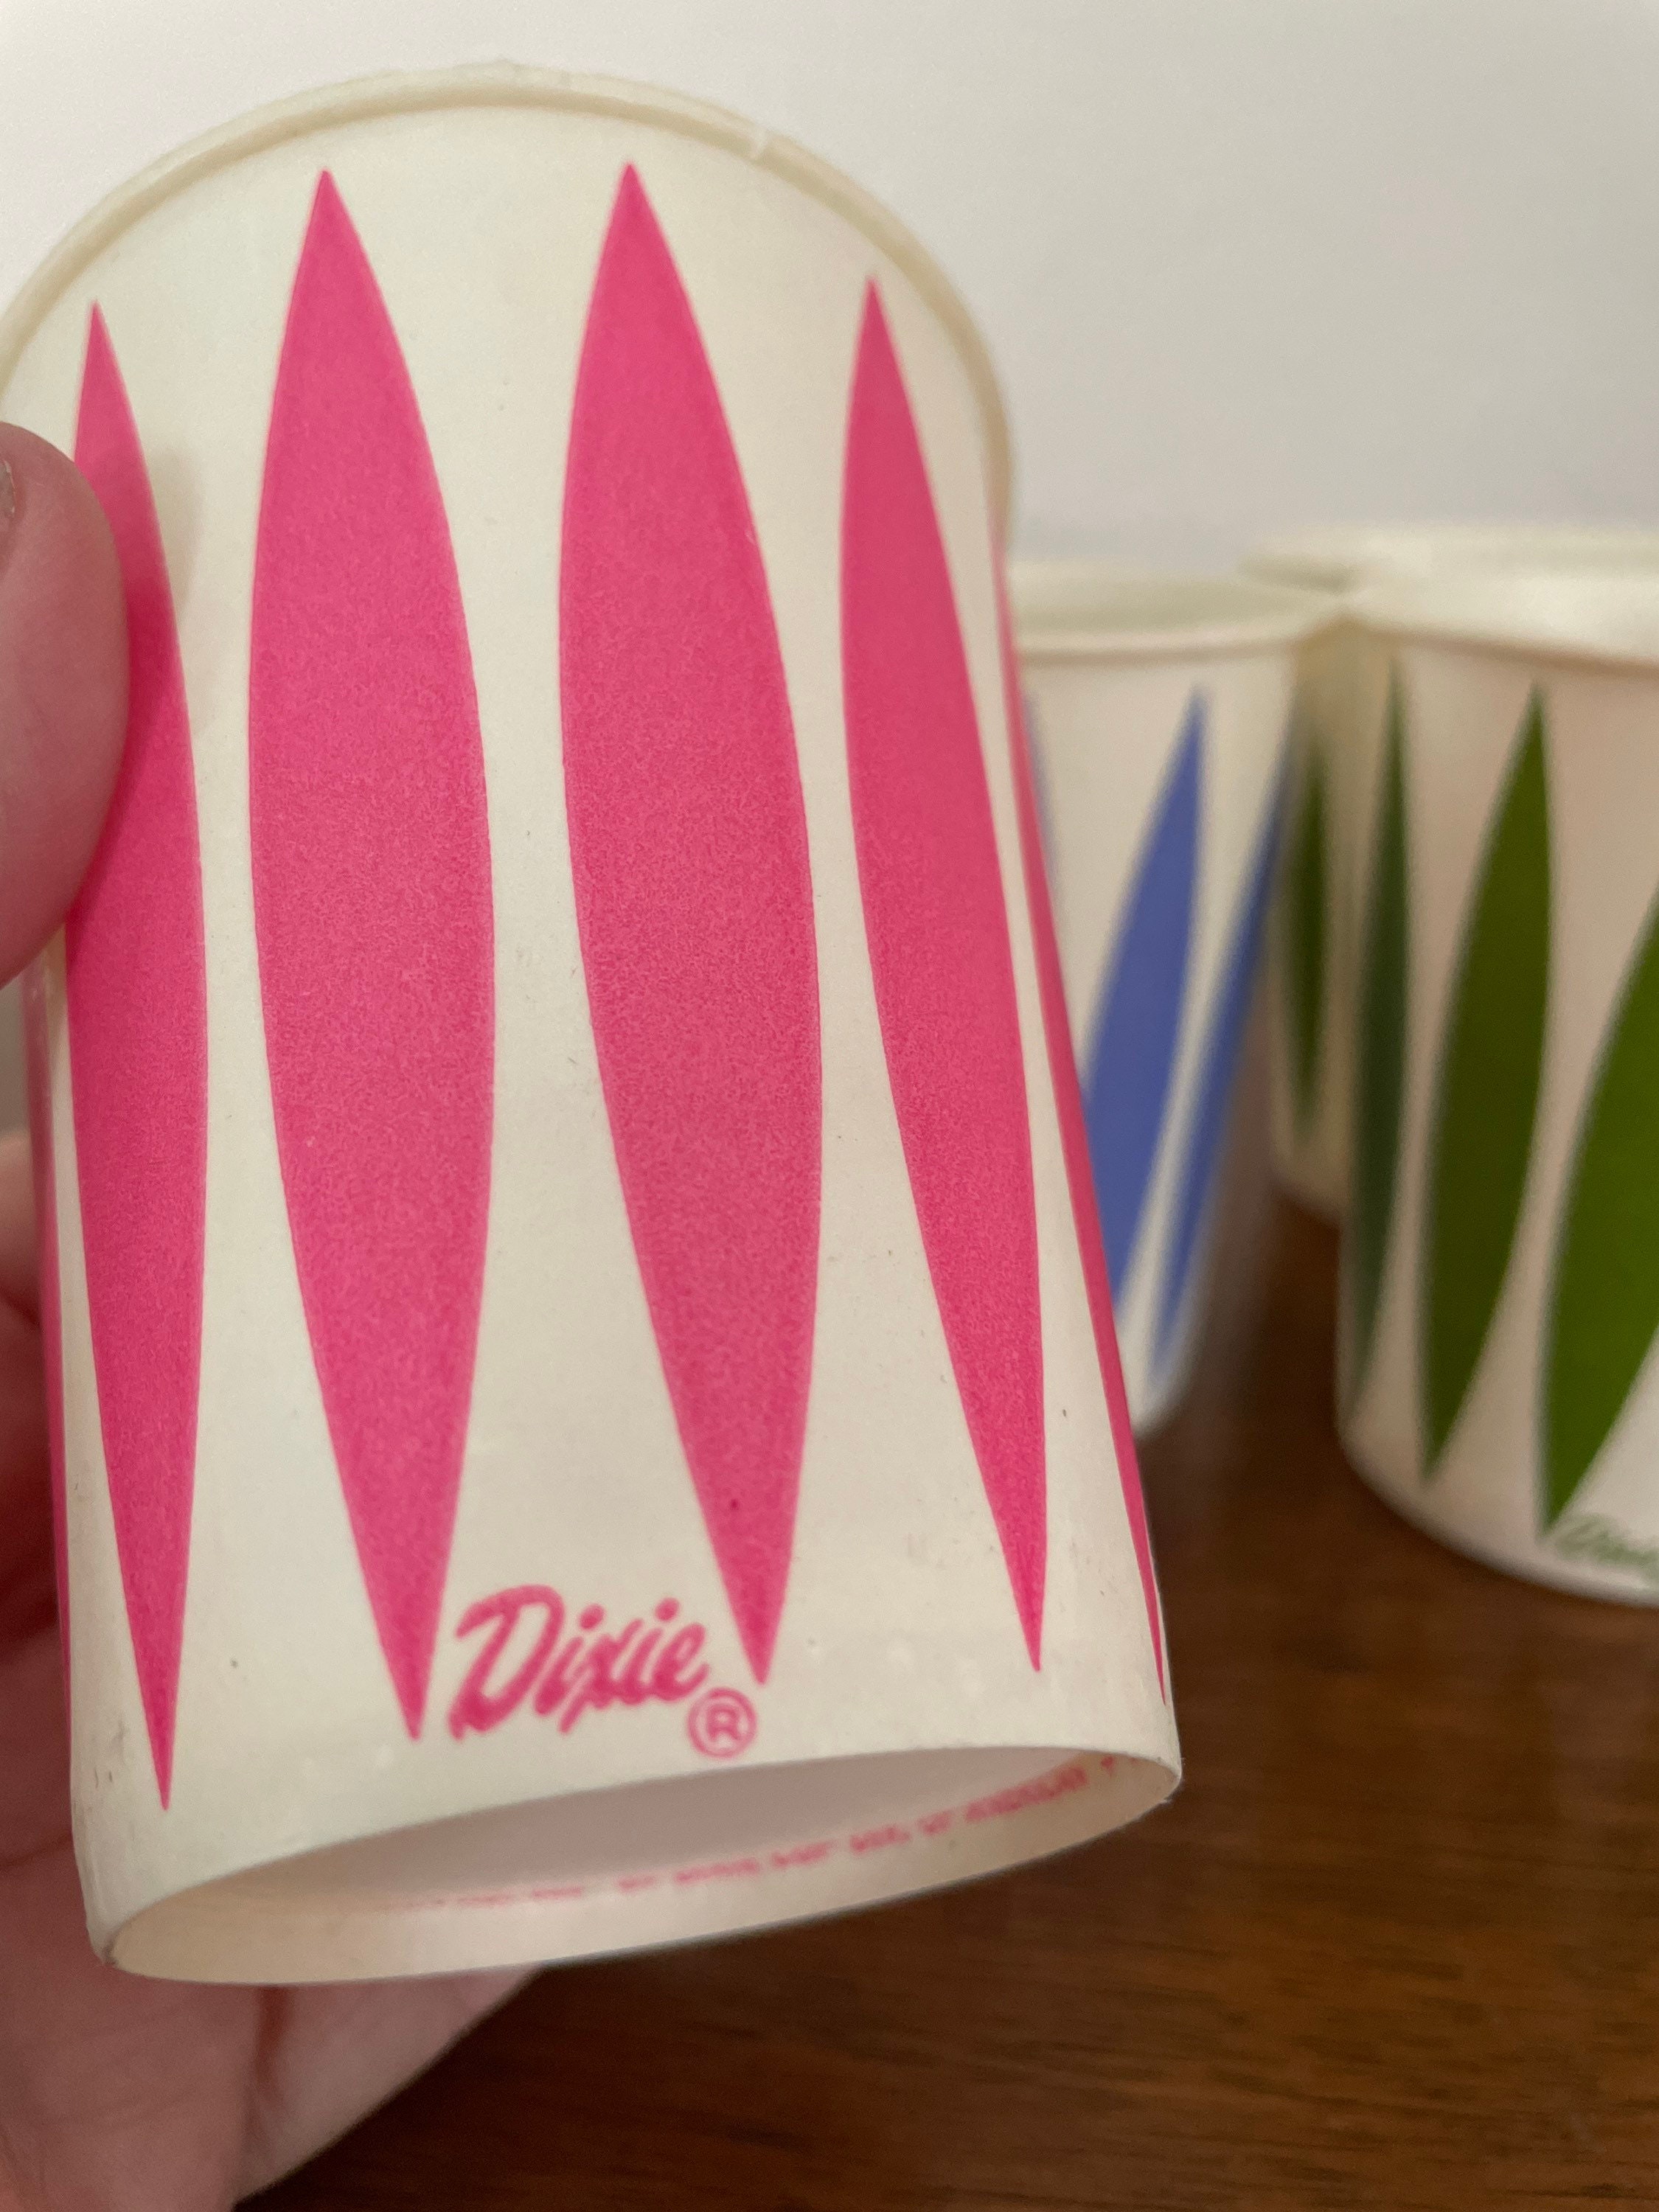 1960s Waxed Drink Cup Box Old Dixie Cups Original Dated 1967 22 Oz Fling  Design 